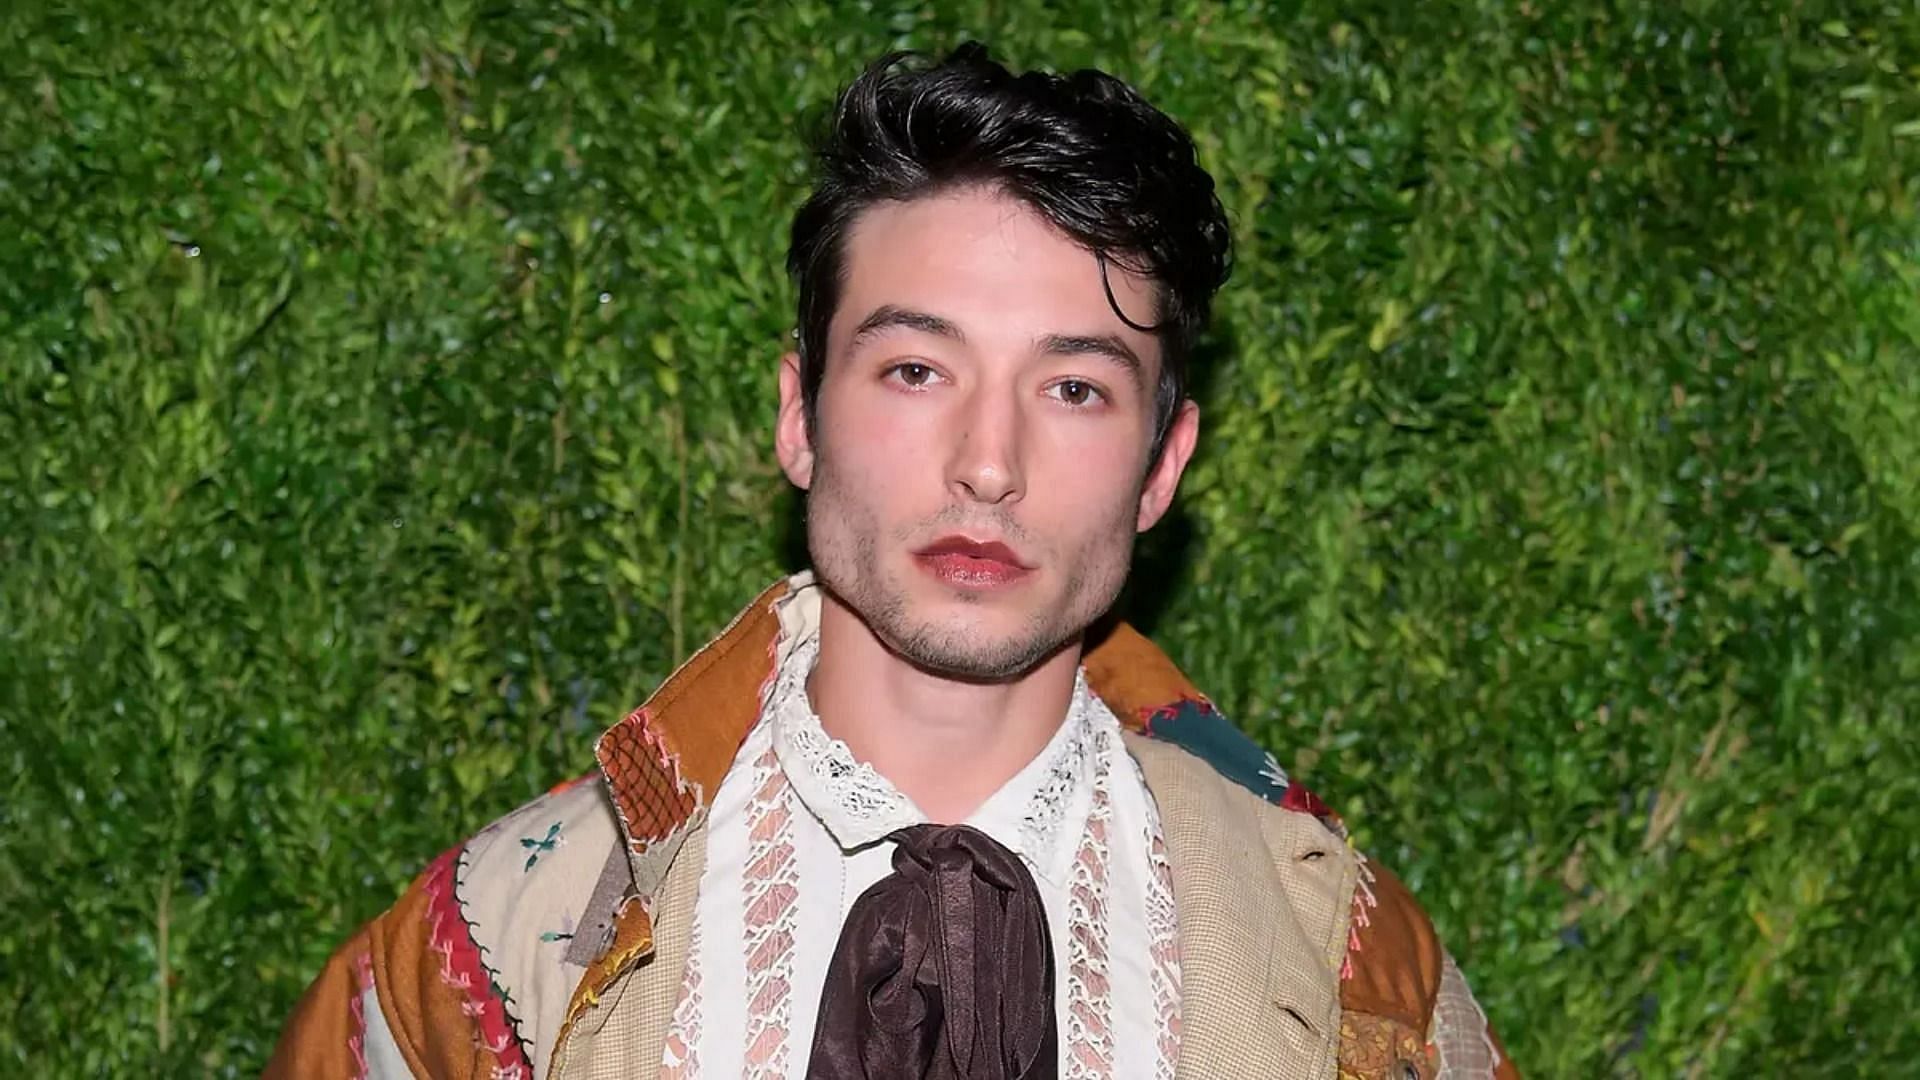 Ezra Miller arrested in Vermont for felony burglary (Image via Getty Images)